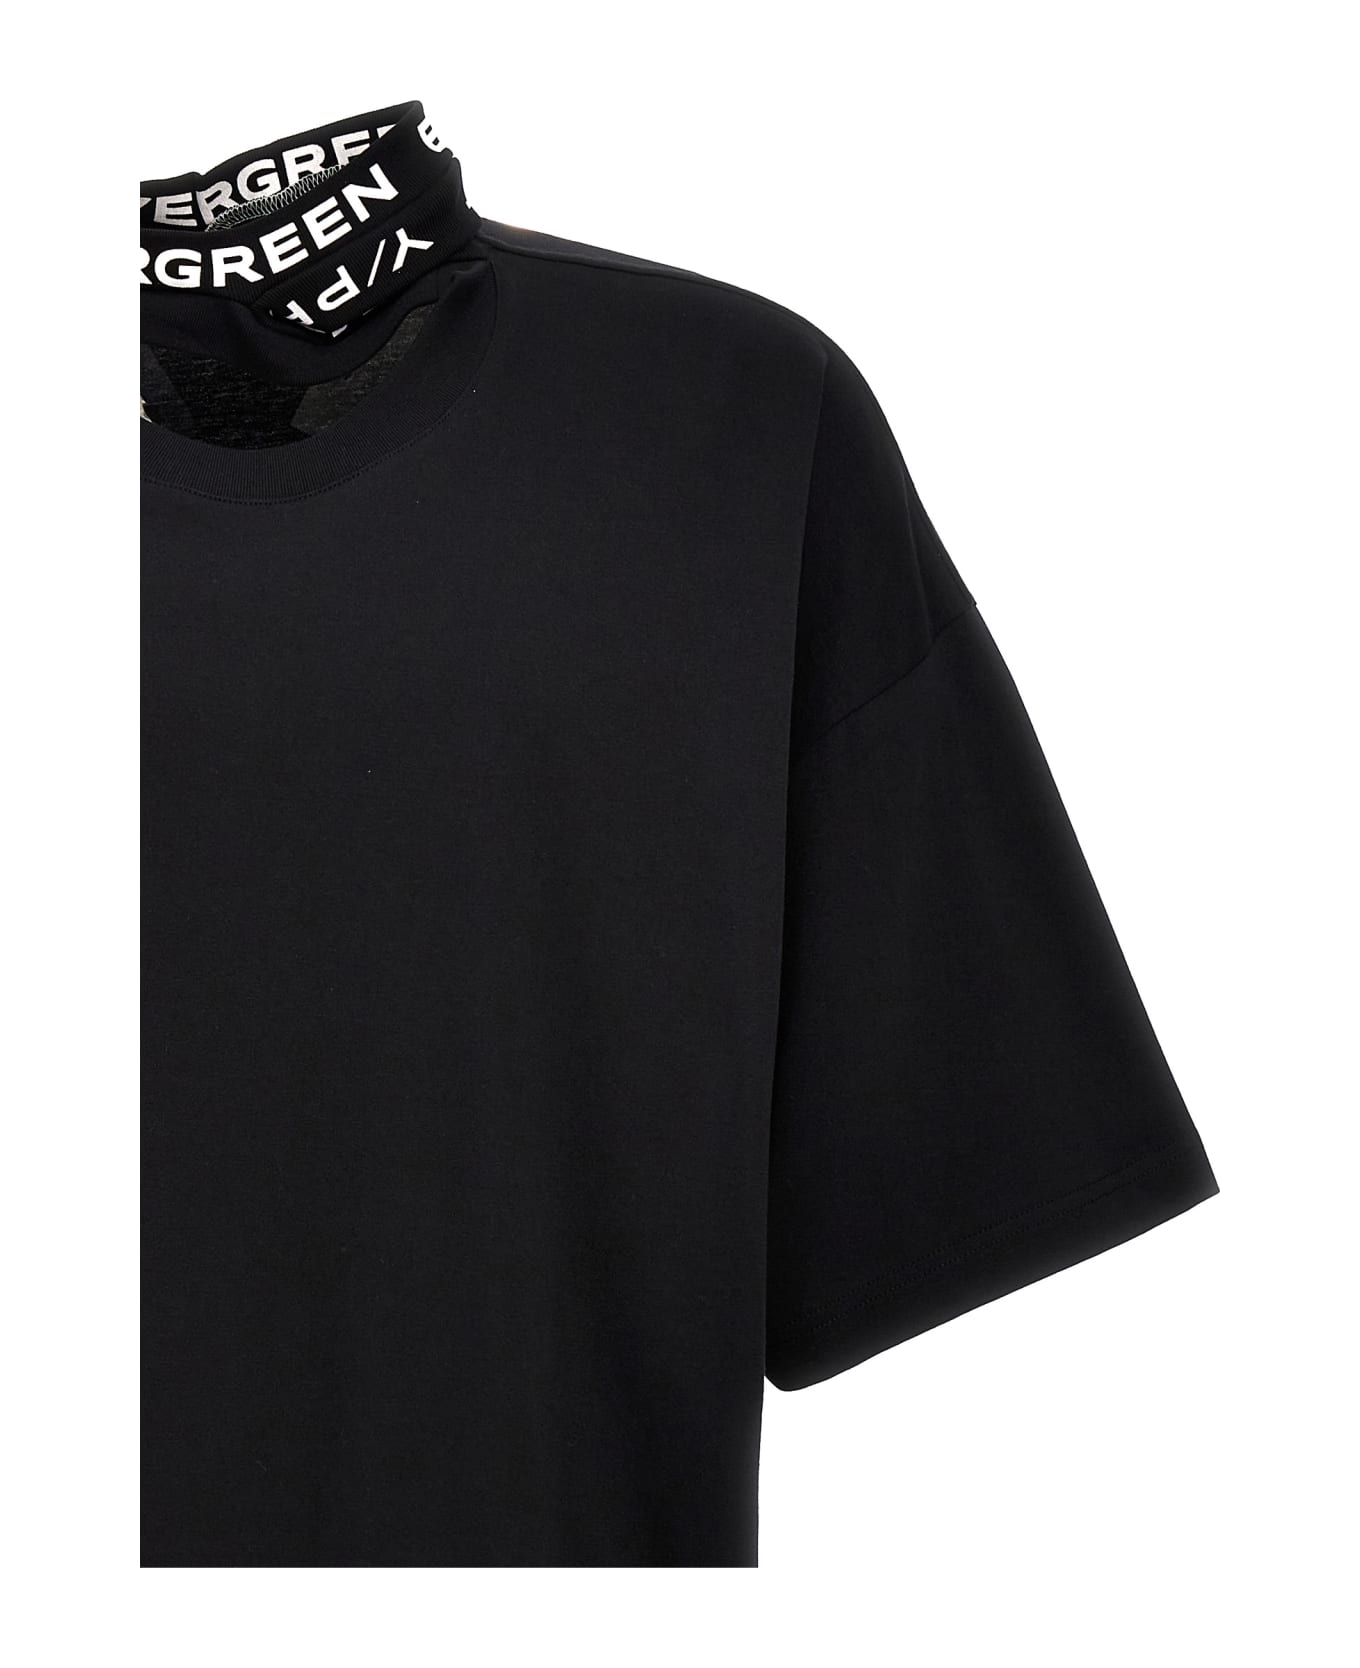 Y/Project 'evergreen' T-shirt - Black   Tシャツ